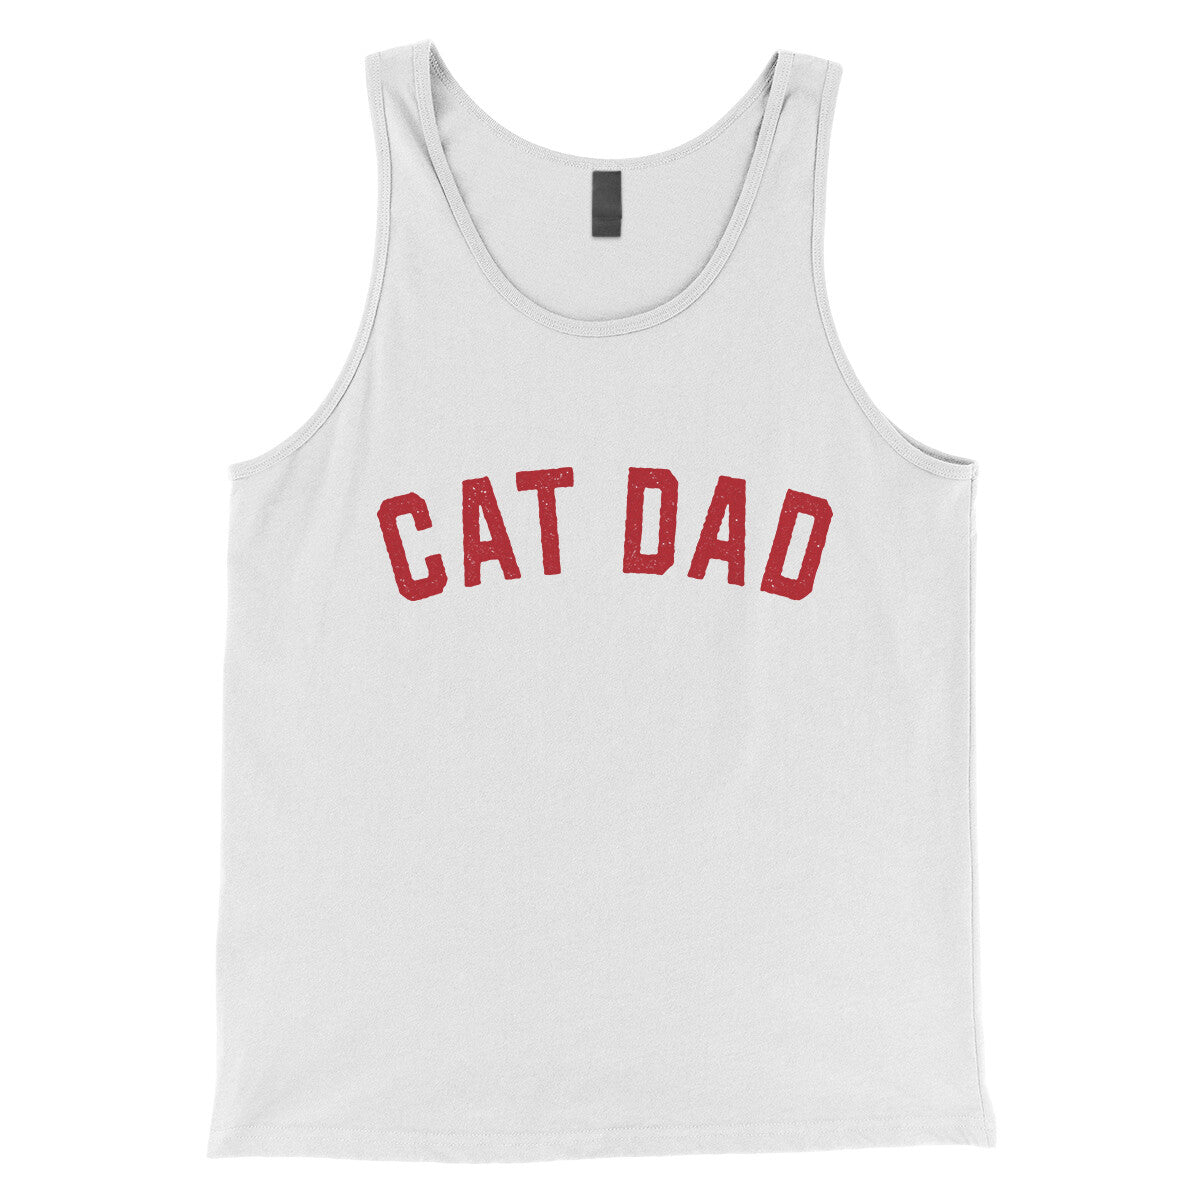 Cat Dad in White Color